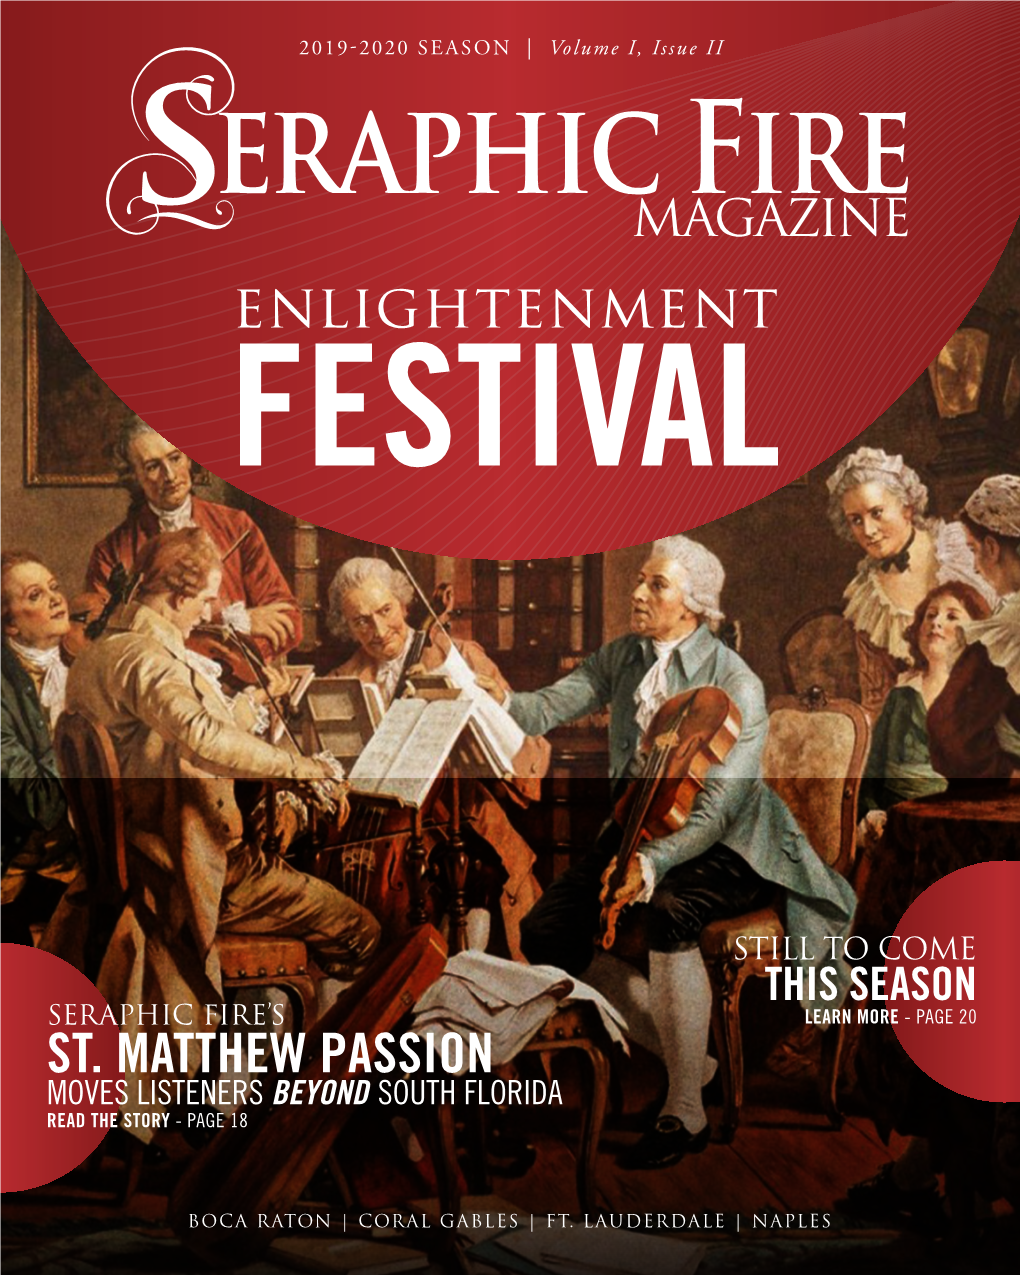 St. Matthew Passion Moves Listeners Beyond South Florida Read the Story - Page 18